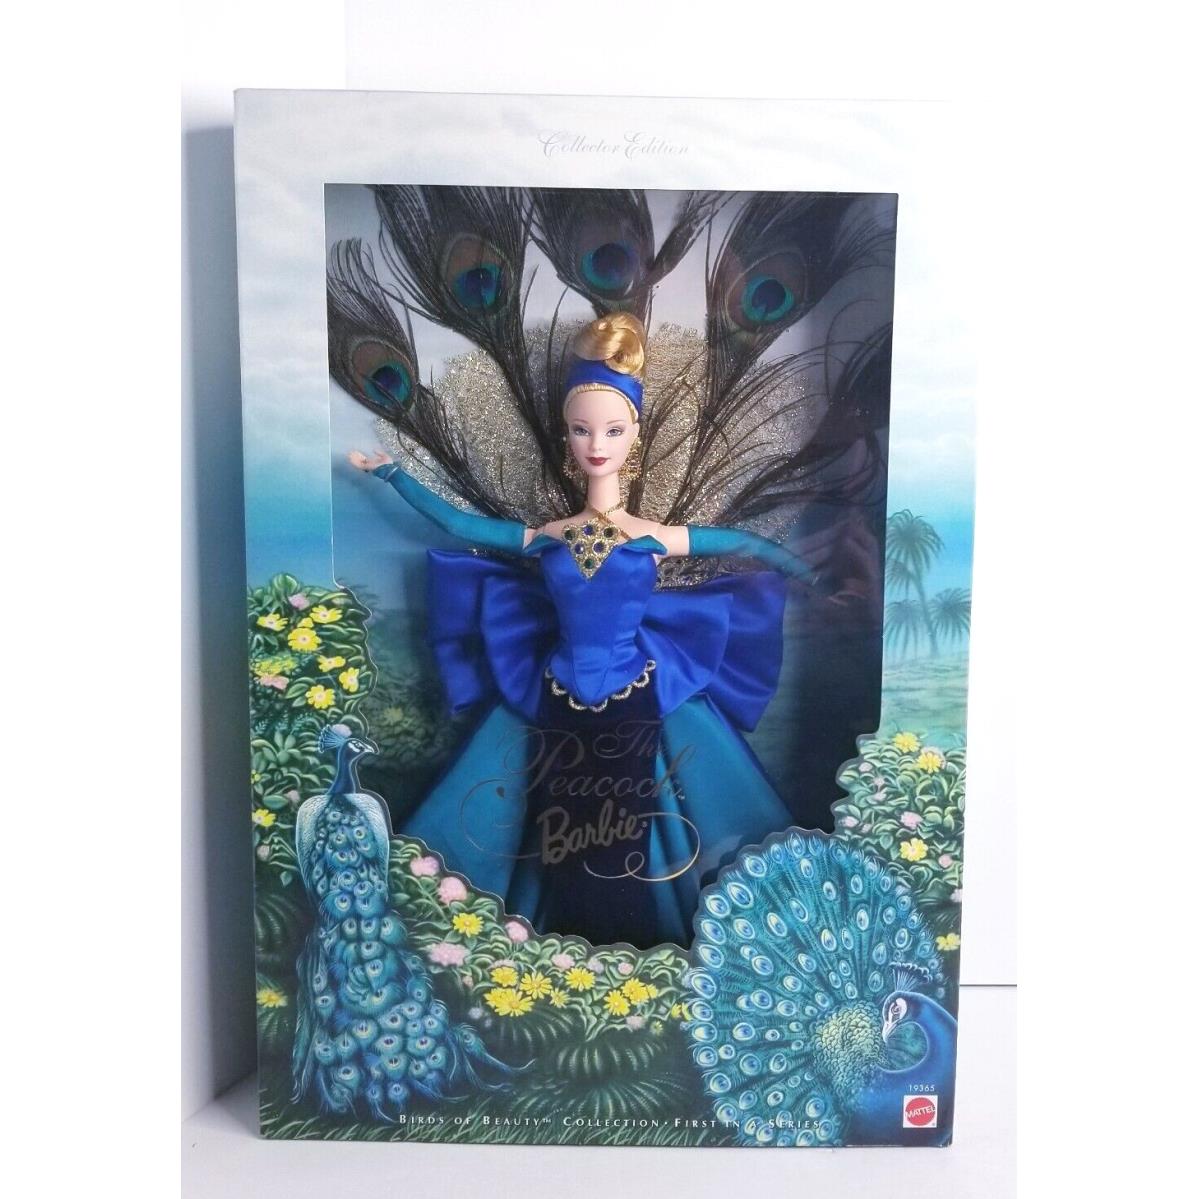 Barbie The Peacock Doll Birds of Beauty Collection 1st in Series Mattel 1998